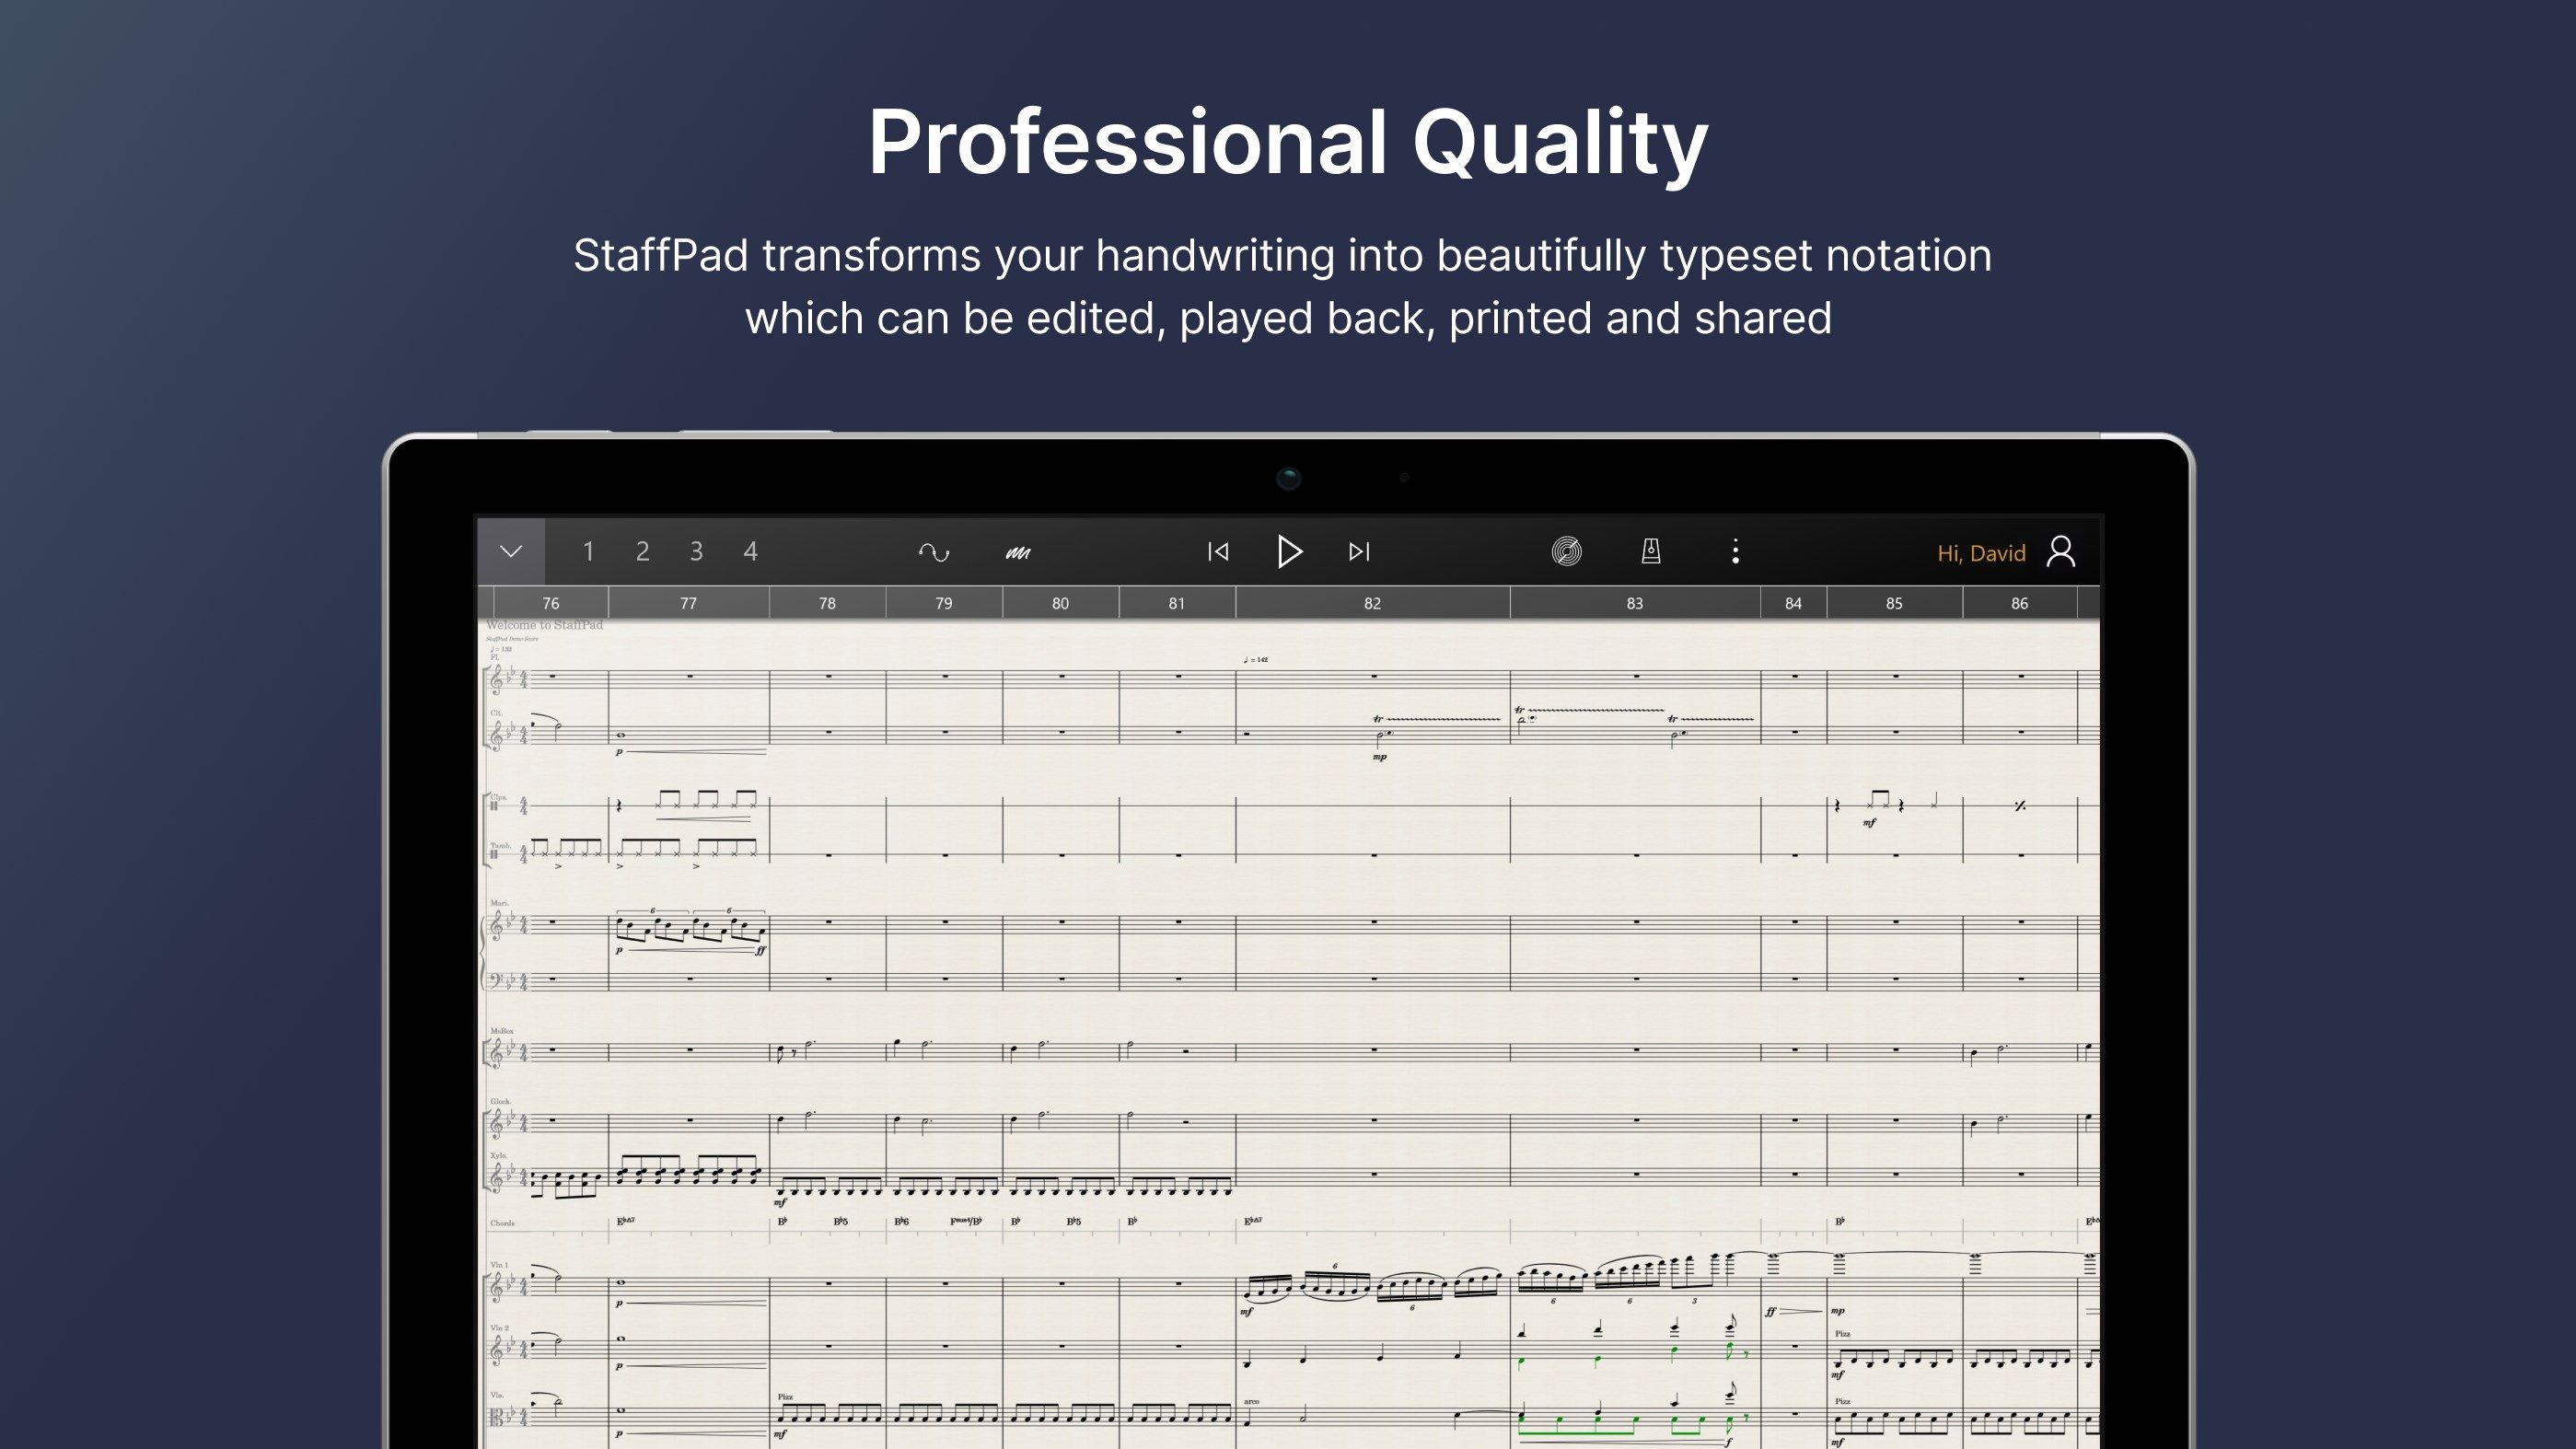 Professional Quality: StaffPad transforms your handwriting into beautifully typeset notation which can be edited, played back, printed and shared